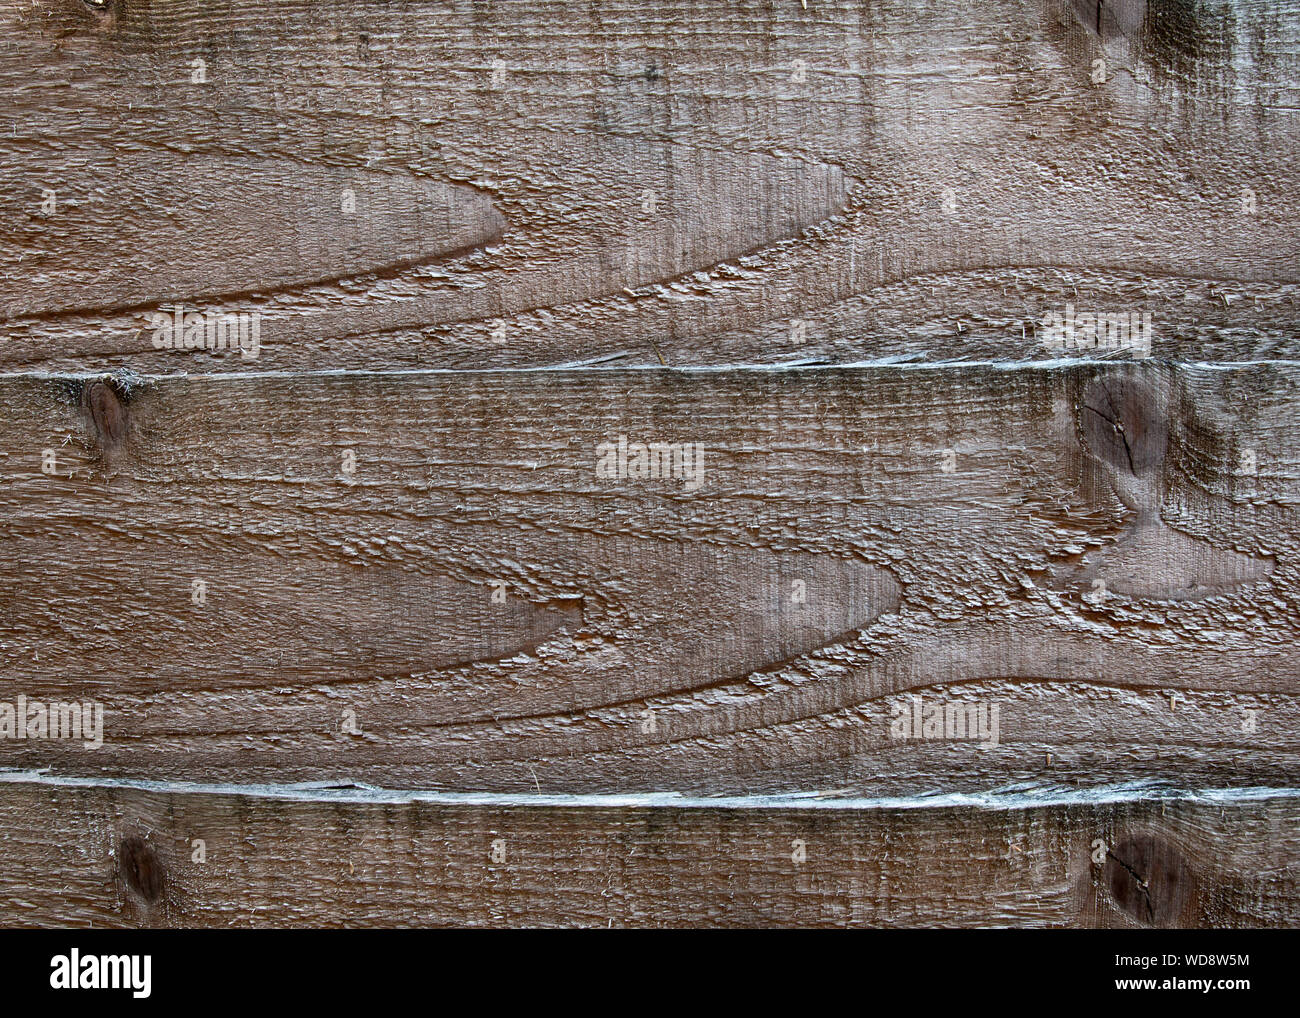 Close up of wood grain on a fence post Stock Photo